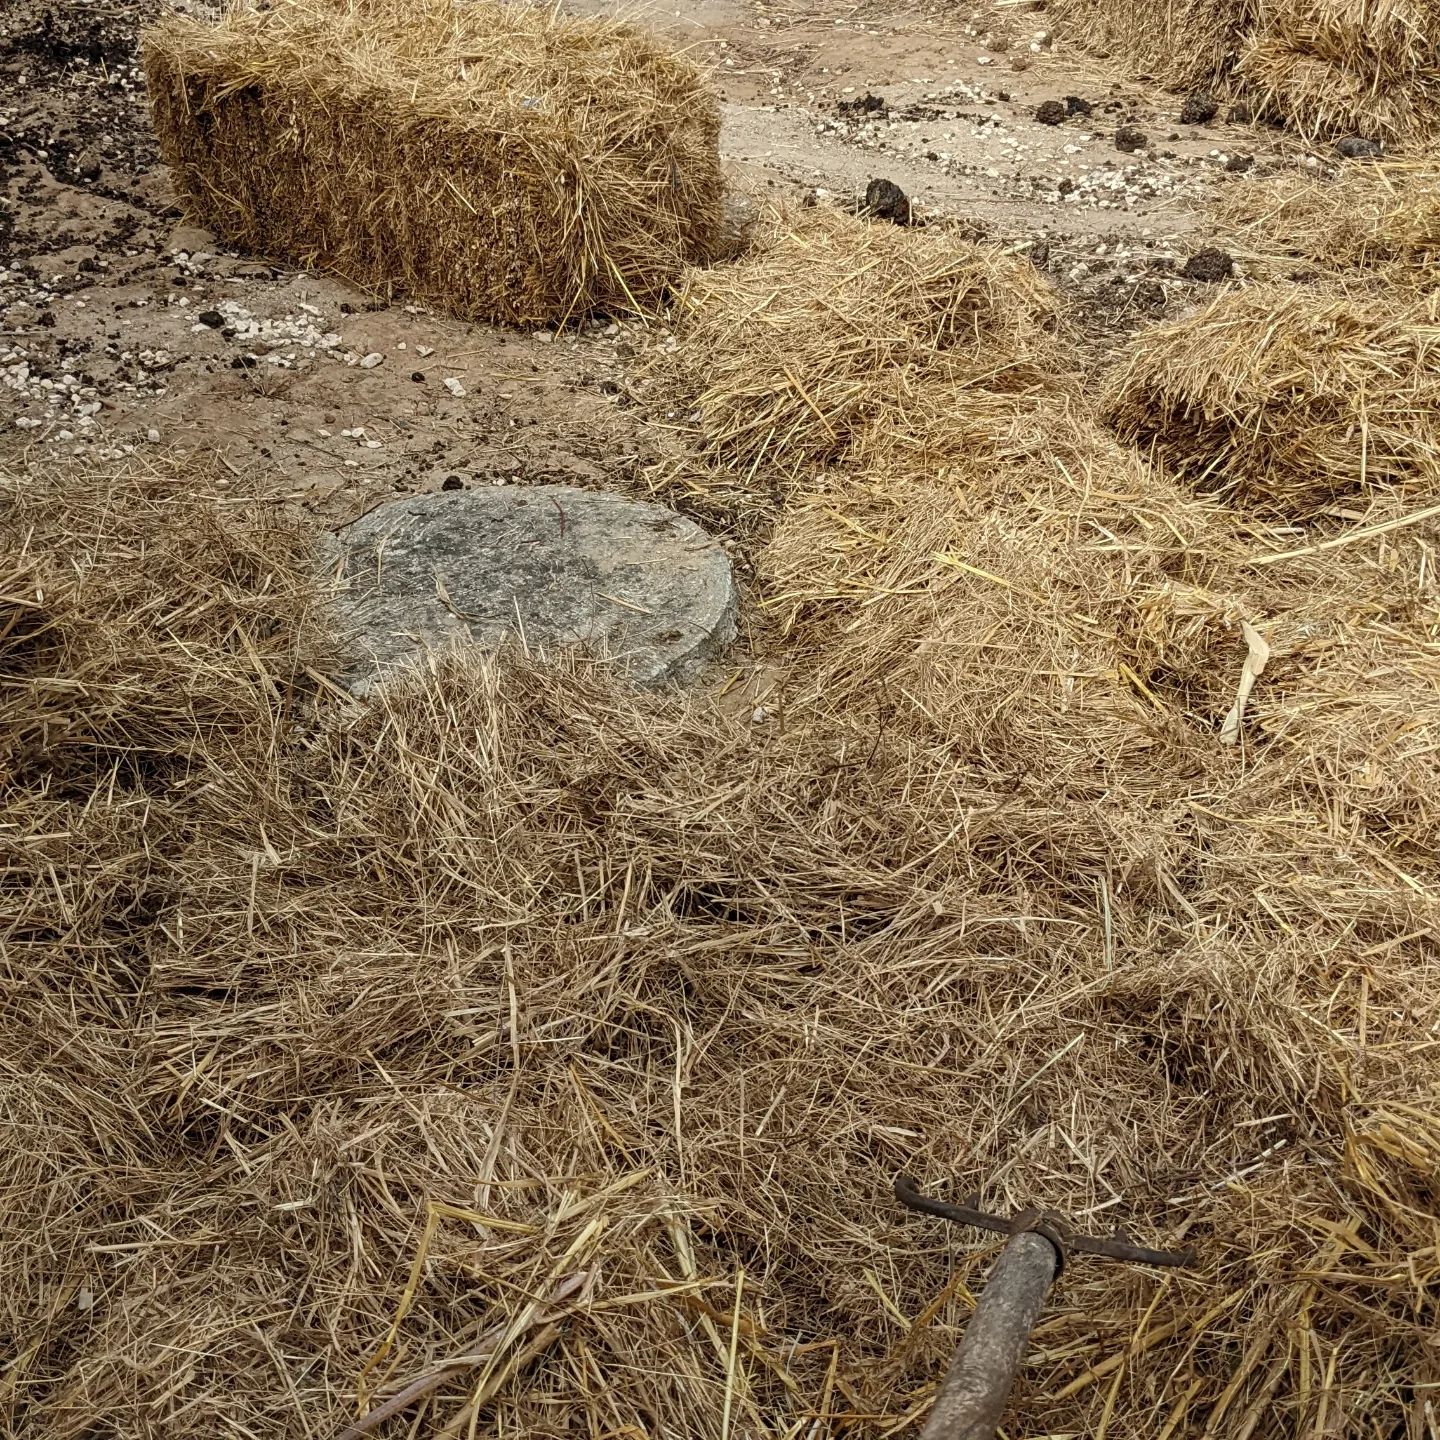 Mulching bare soil north and west of the house with straw